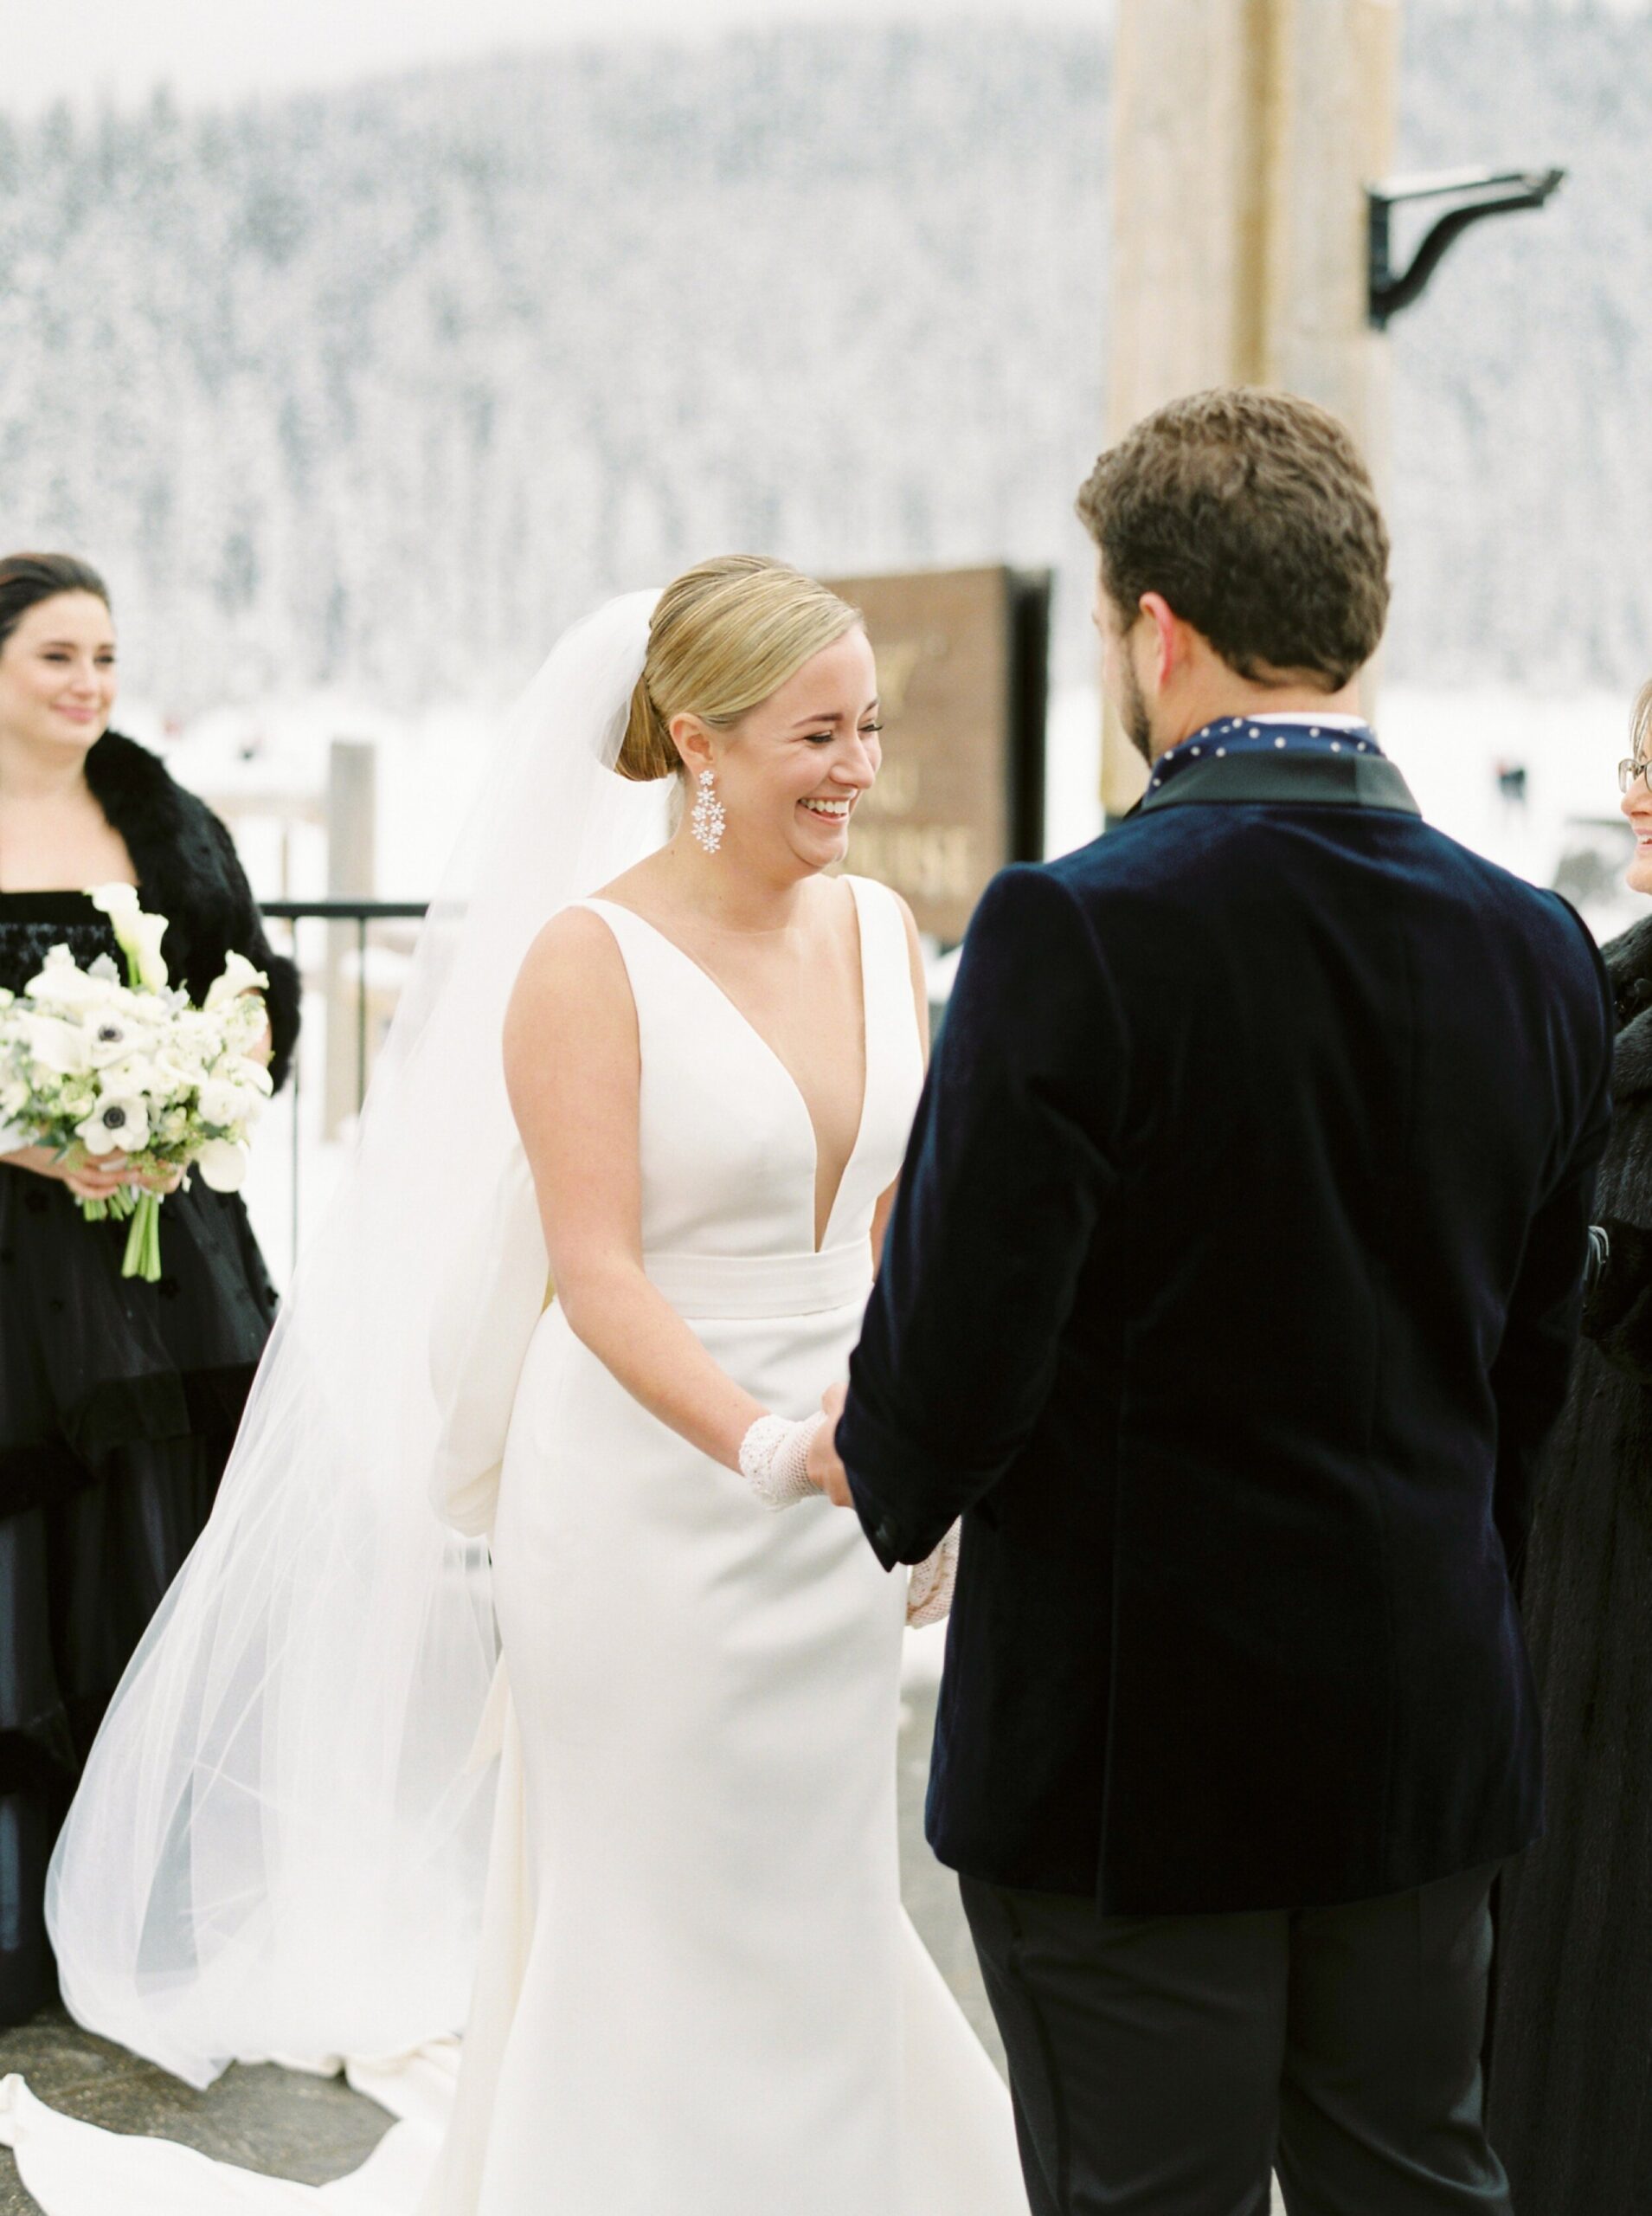  Lake louise winter wonderland wedding | fitted wedding dress with giant bow 